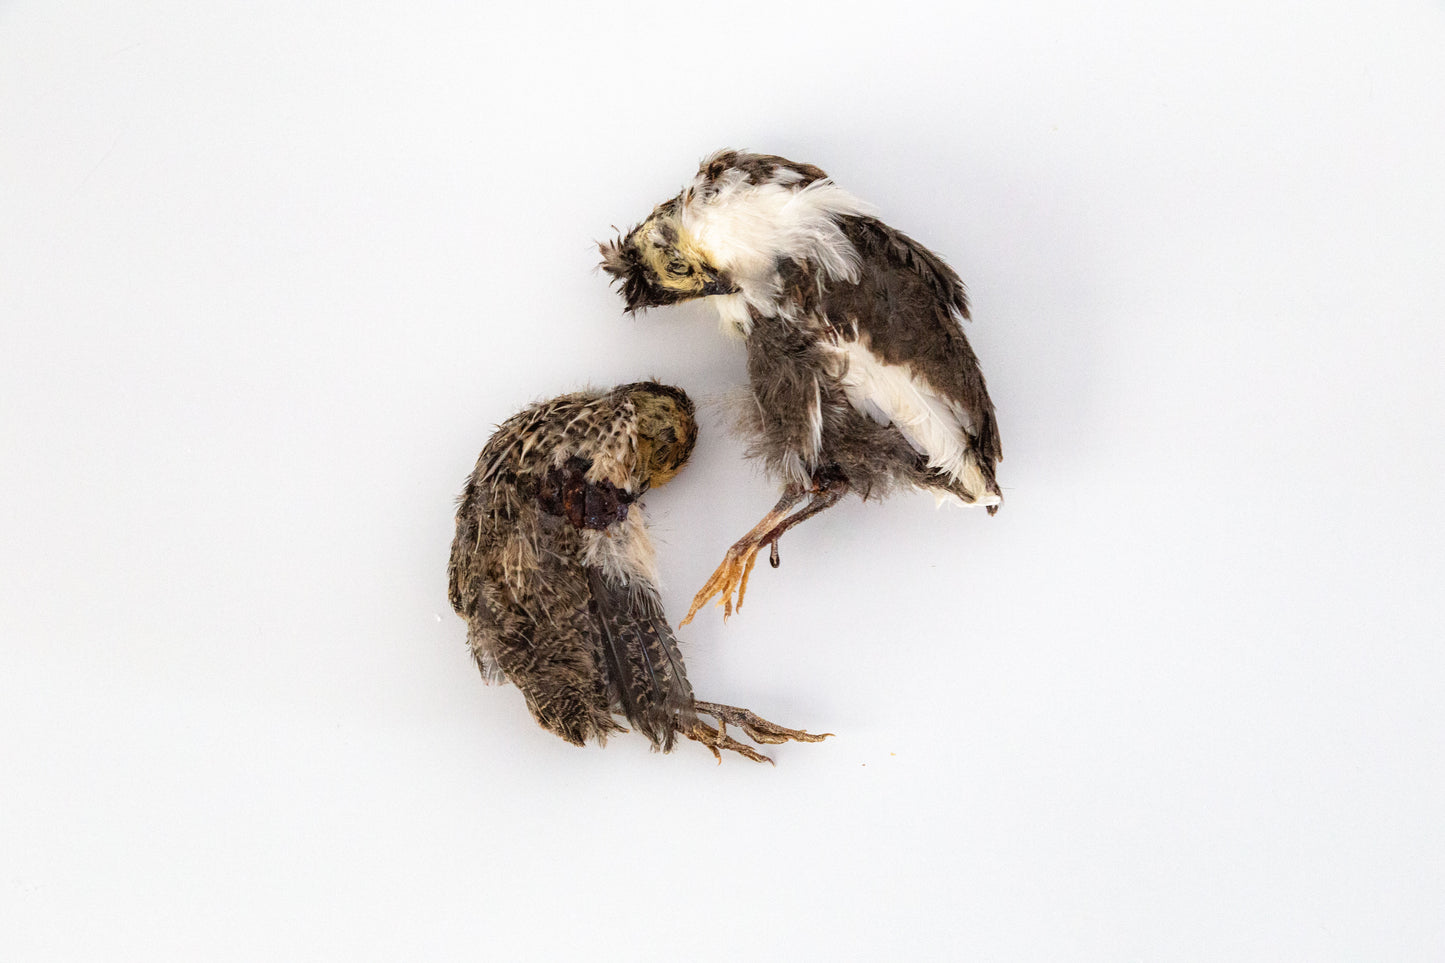 Dehydrated Whole Prey Quails with Feathers